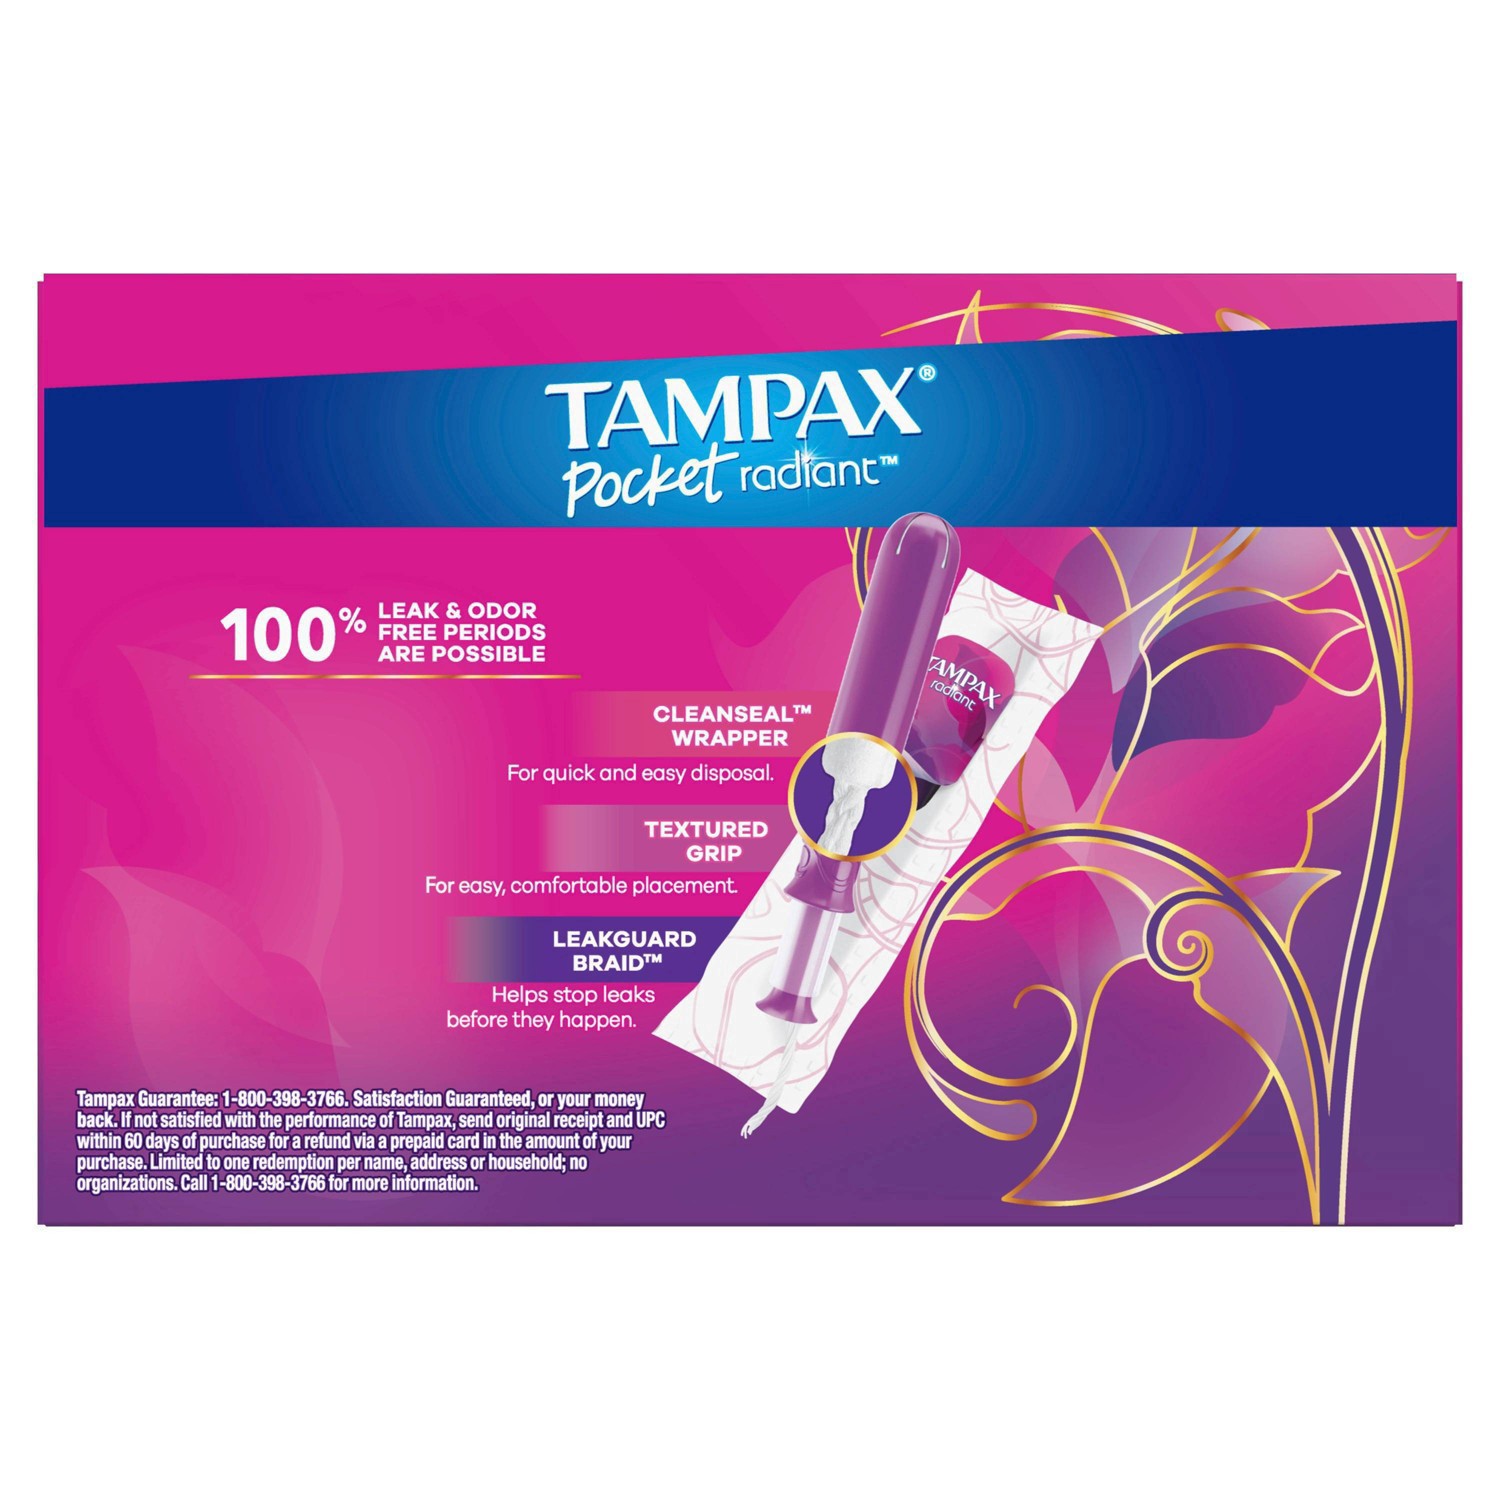 slide 60 of 94, Tampax Pocket Radiant Compact Plastic Tampons, With LeakGuard Braid, Super Absorbency, Unscented, 28 Count, 28 ct